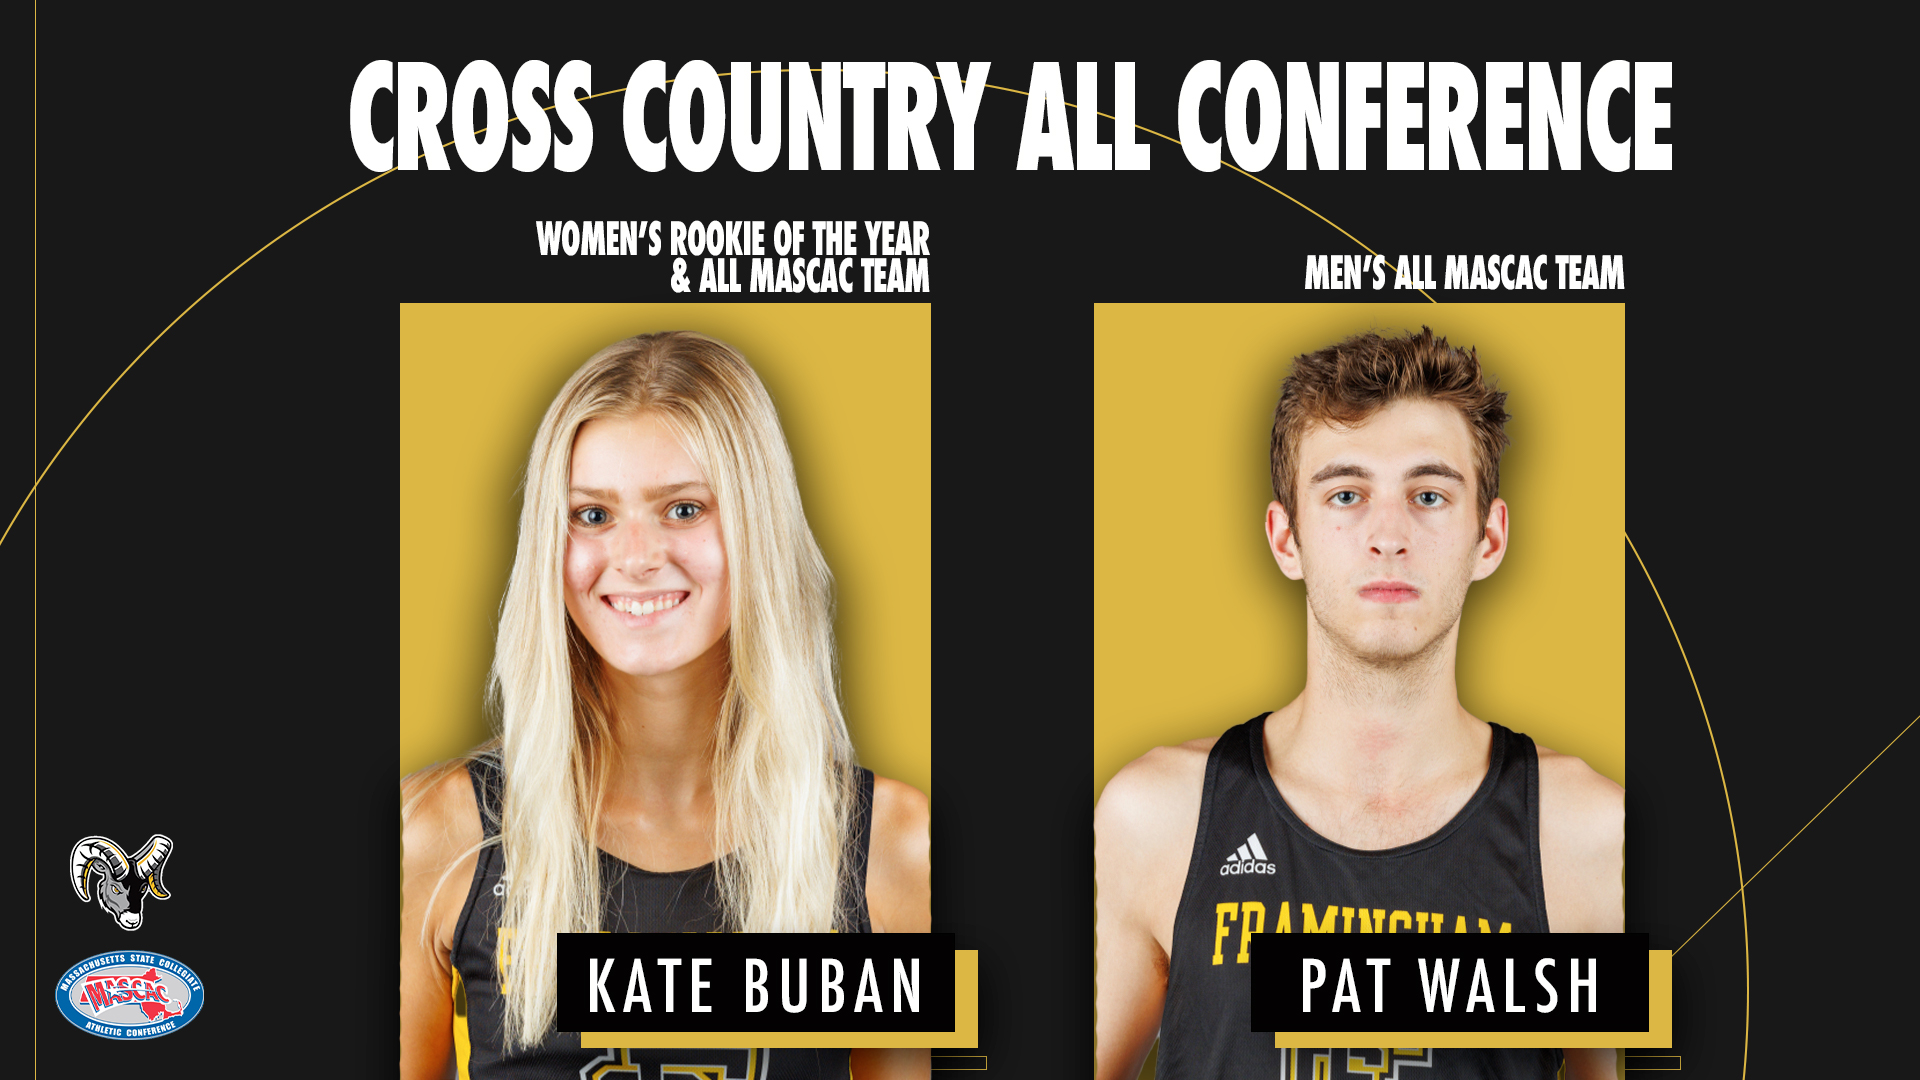 Buban and Walsh Earn All-MASCAC Cross Country Honors &ndash; Buban Named Rookie of the Year